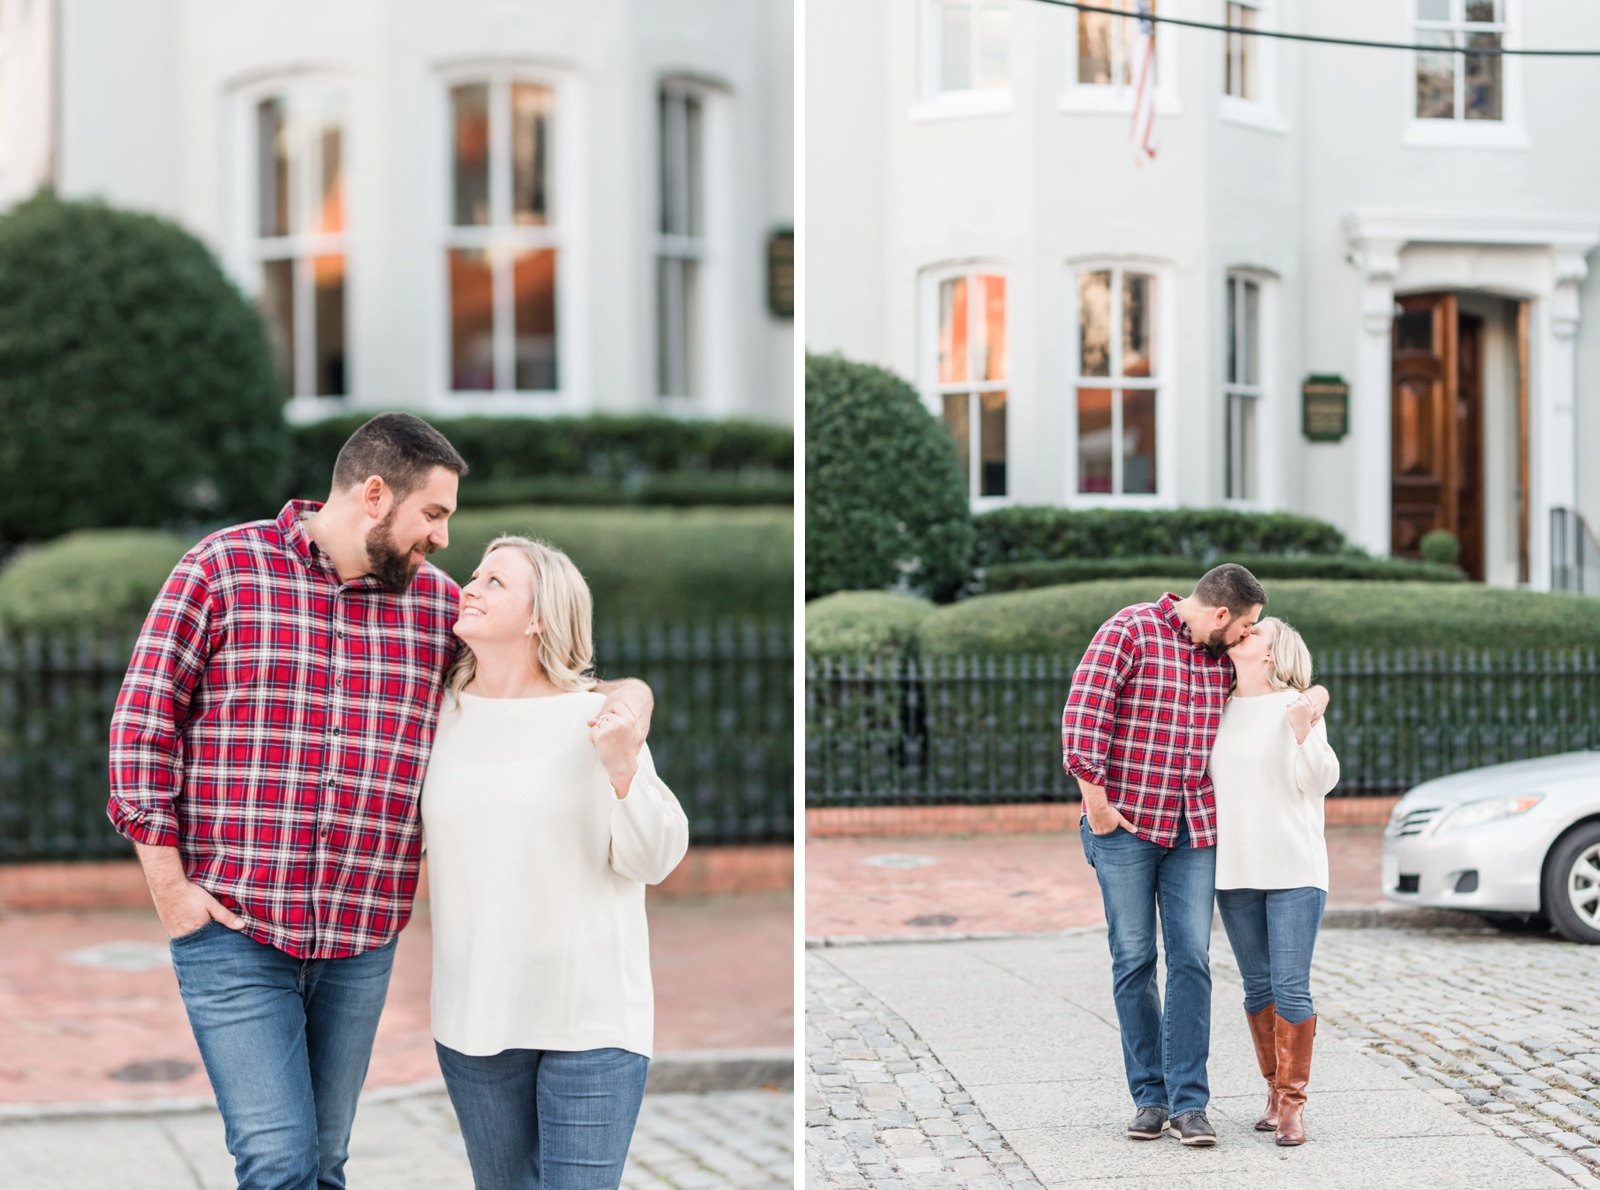 downtown-norfolk-virginia-fall-engagement-session-photo_2314.jpg